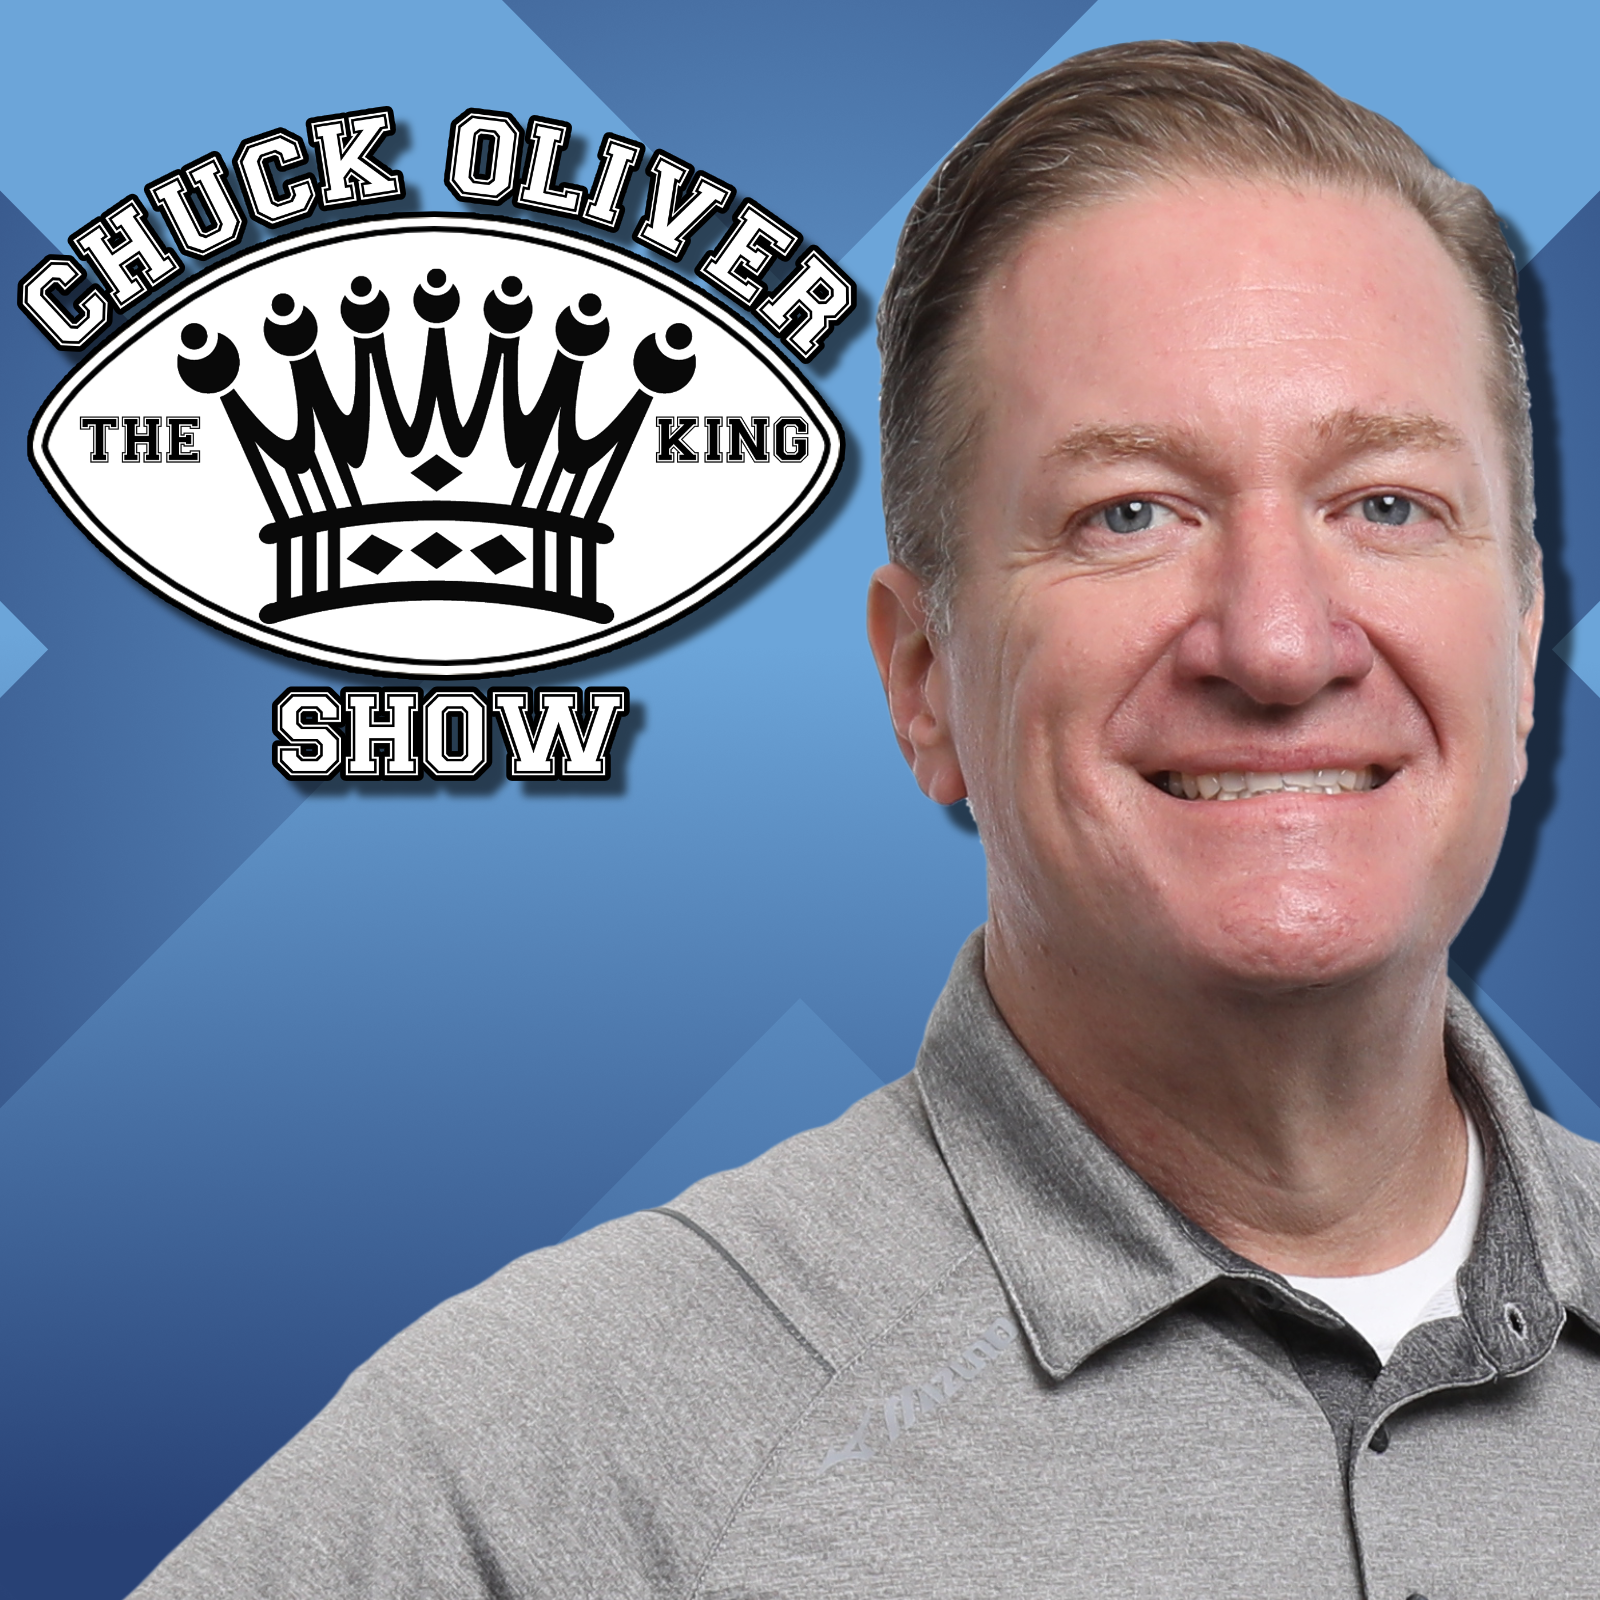 CHUCK OLIVER SHOW 2-12 FRIDAY HOUR 2